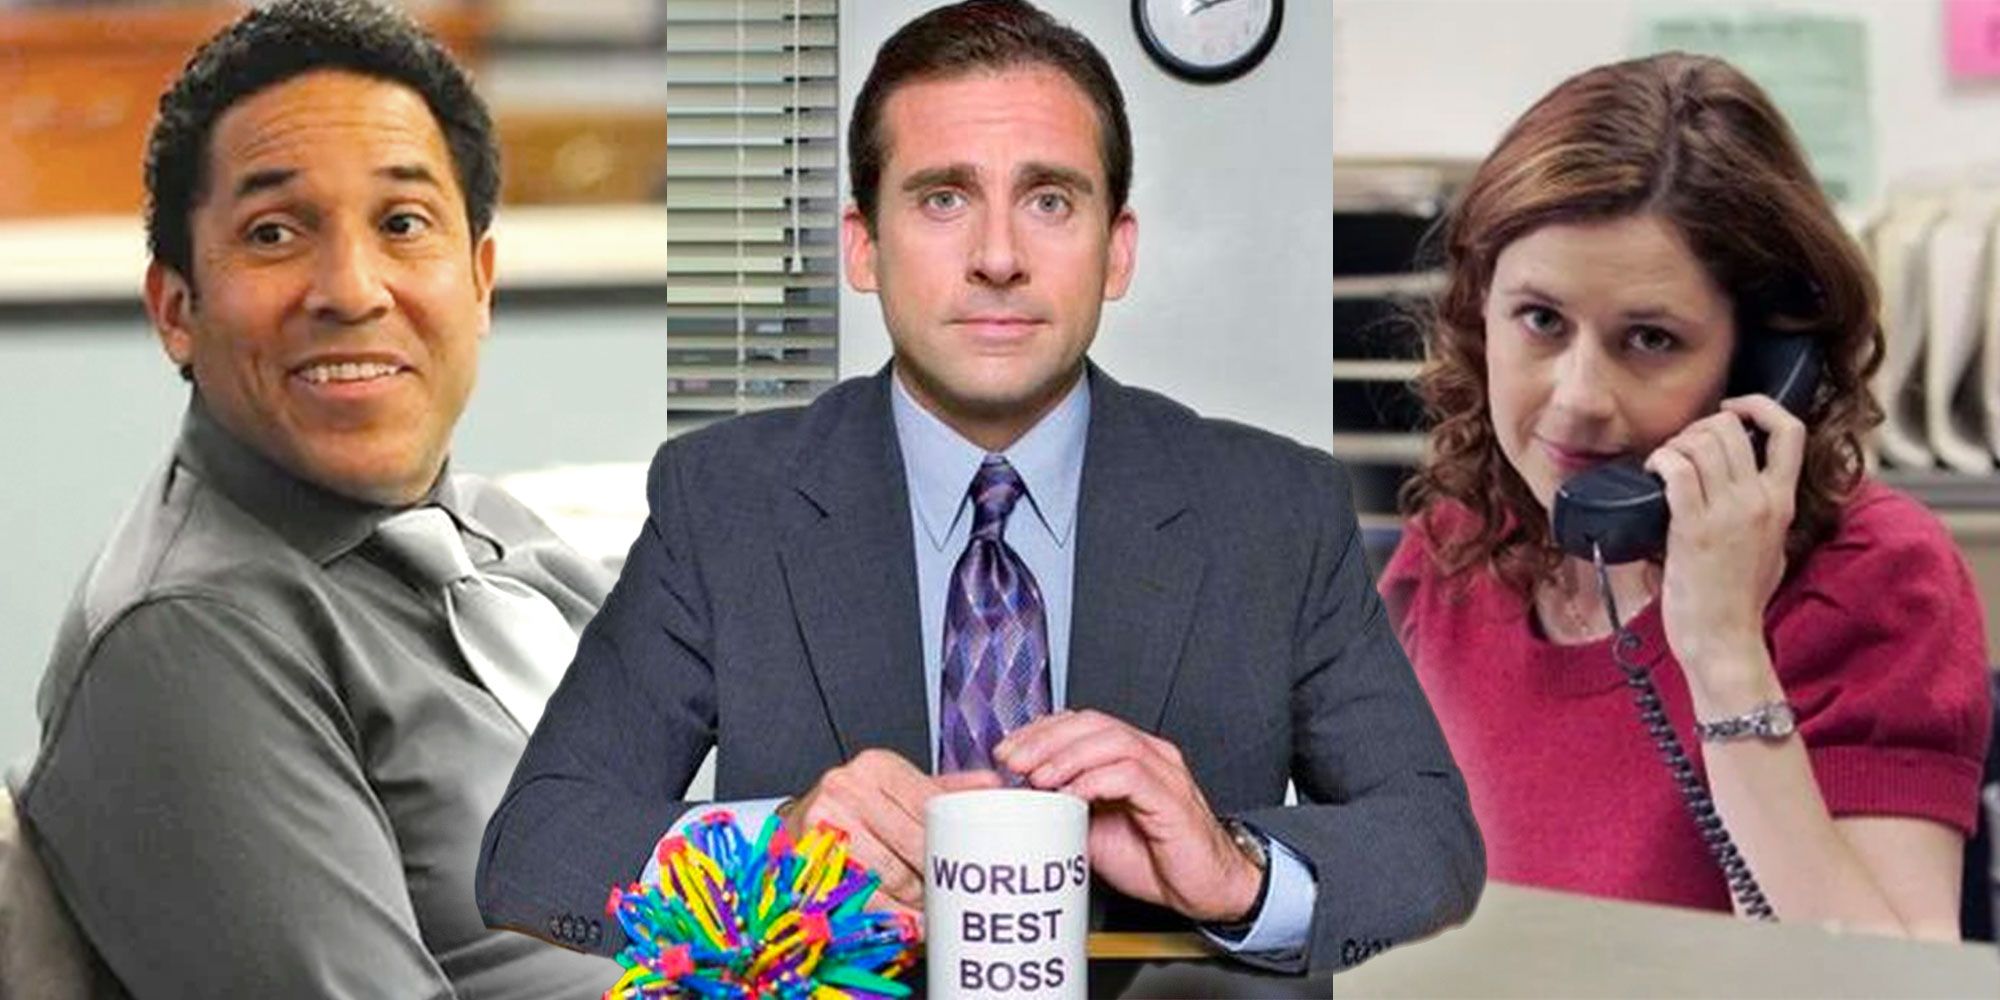 Split image of The Office characters Oscar, Michael, and Pam